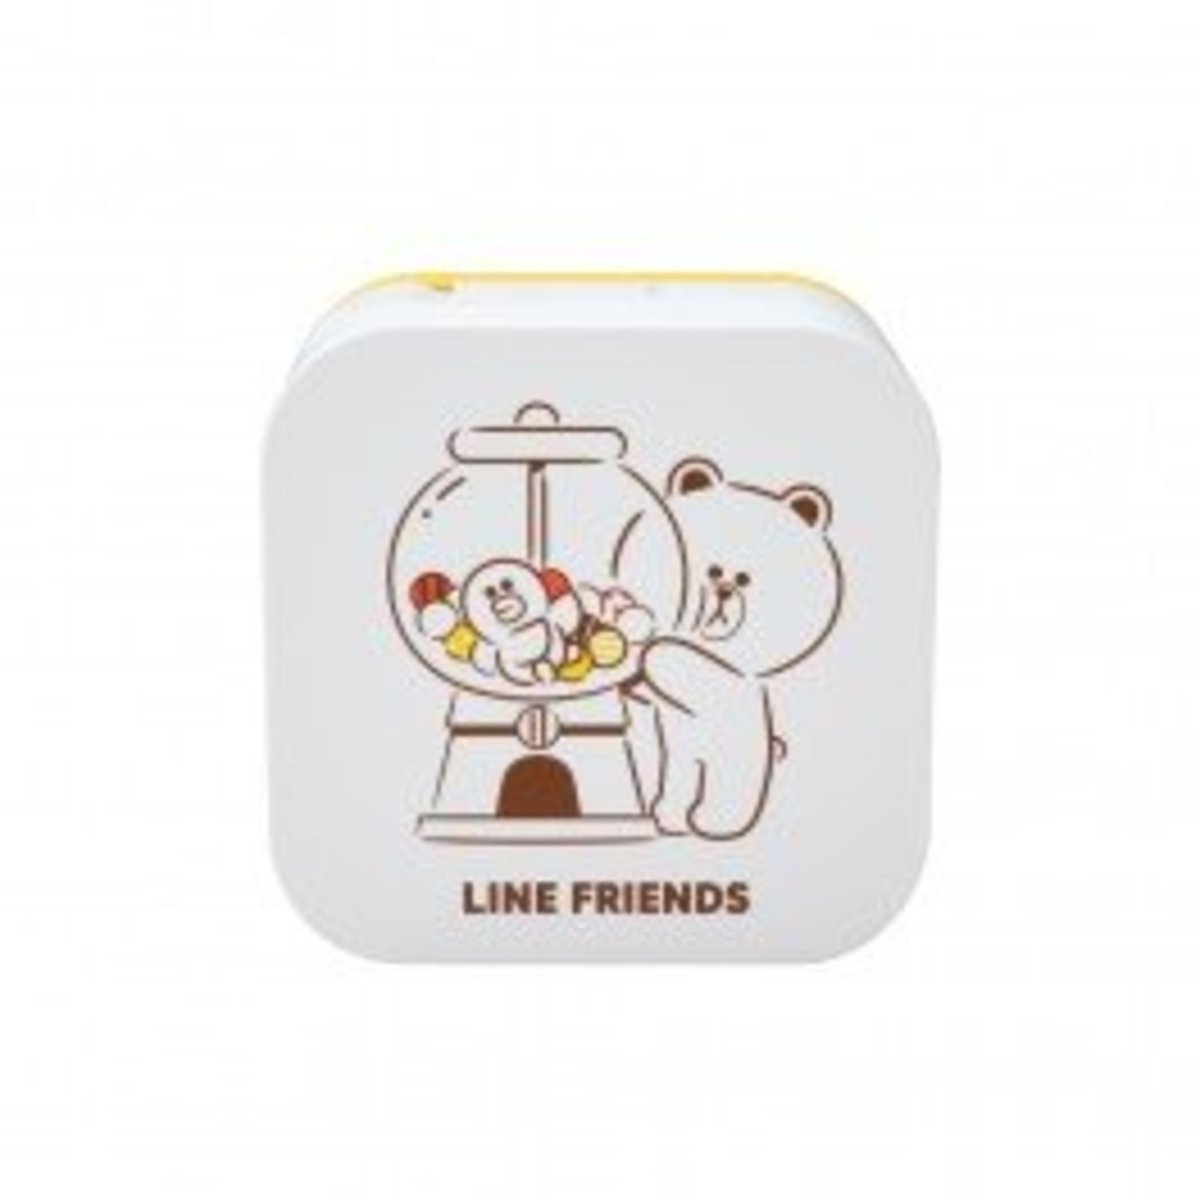 BROTHER - PTP300BTLB P-touch Cube LINE FRIENDS Styling Bluetooth Label Machine [Licensed in Hong Kong]